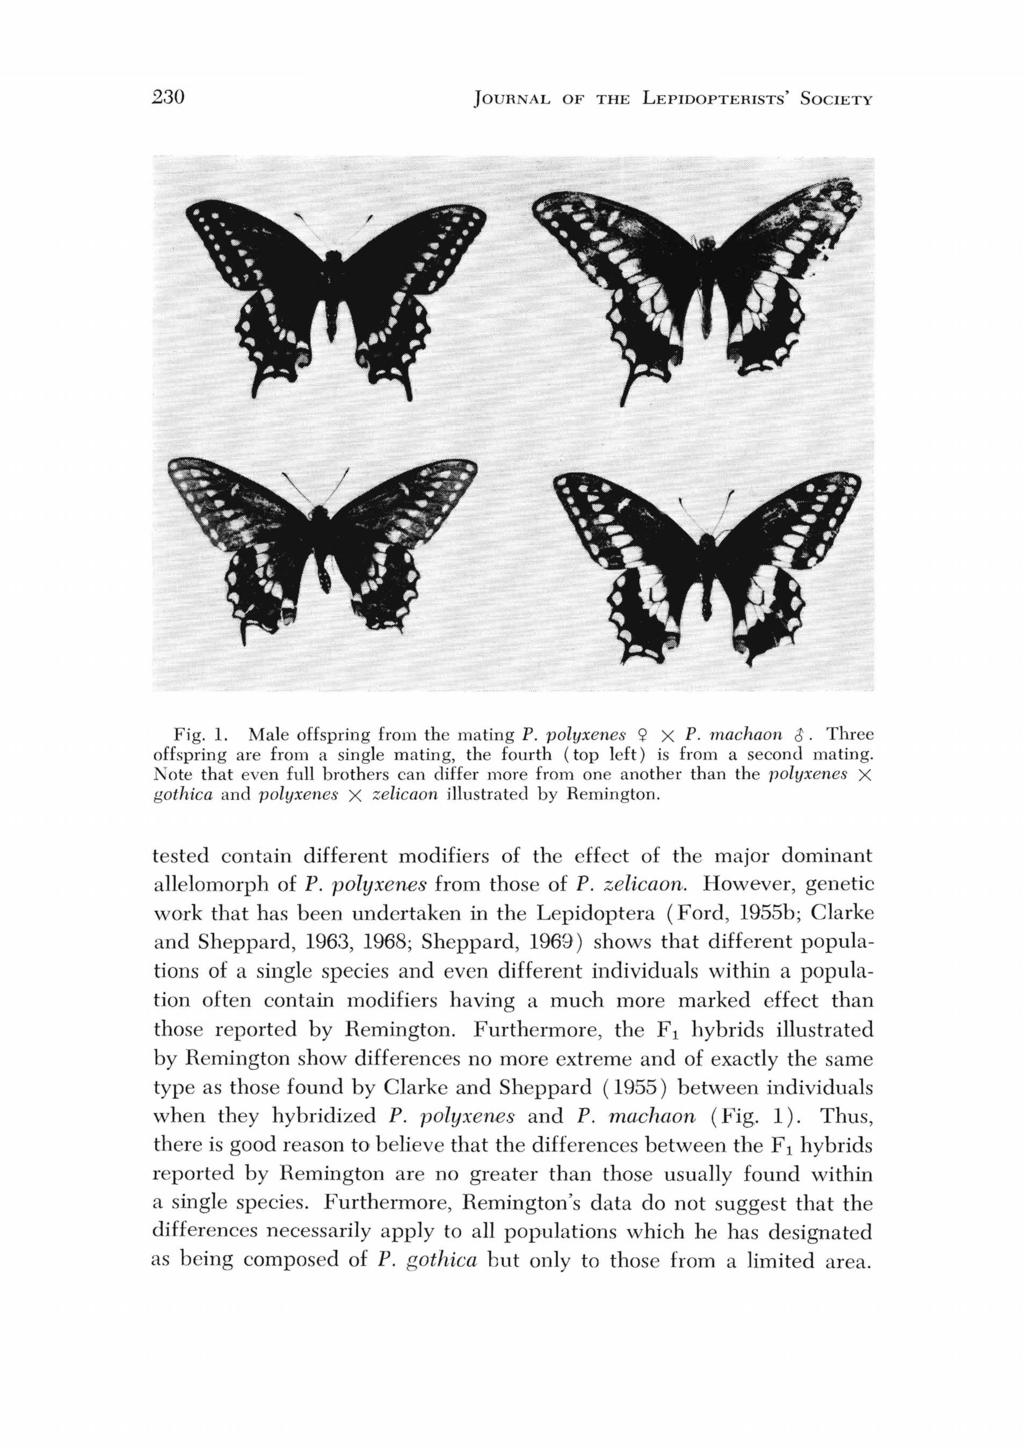 230 JOURNAL OF THE LEPIDOPTERISTS' SOCIETY Fig. 1. Male offspring from the mating P. polyxenes «X P. machaon ~. Three offspring are from a single mating, the fourth (top left) is from a second mating.